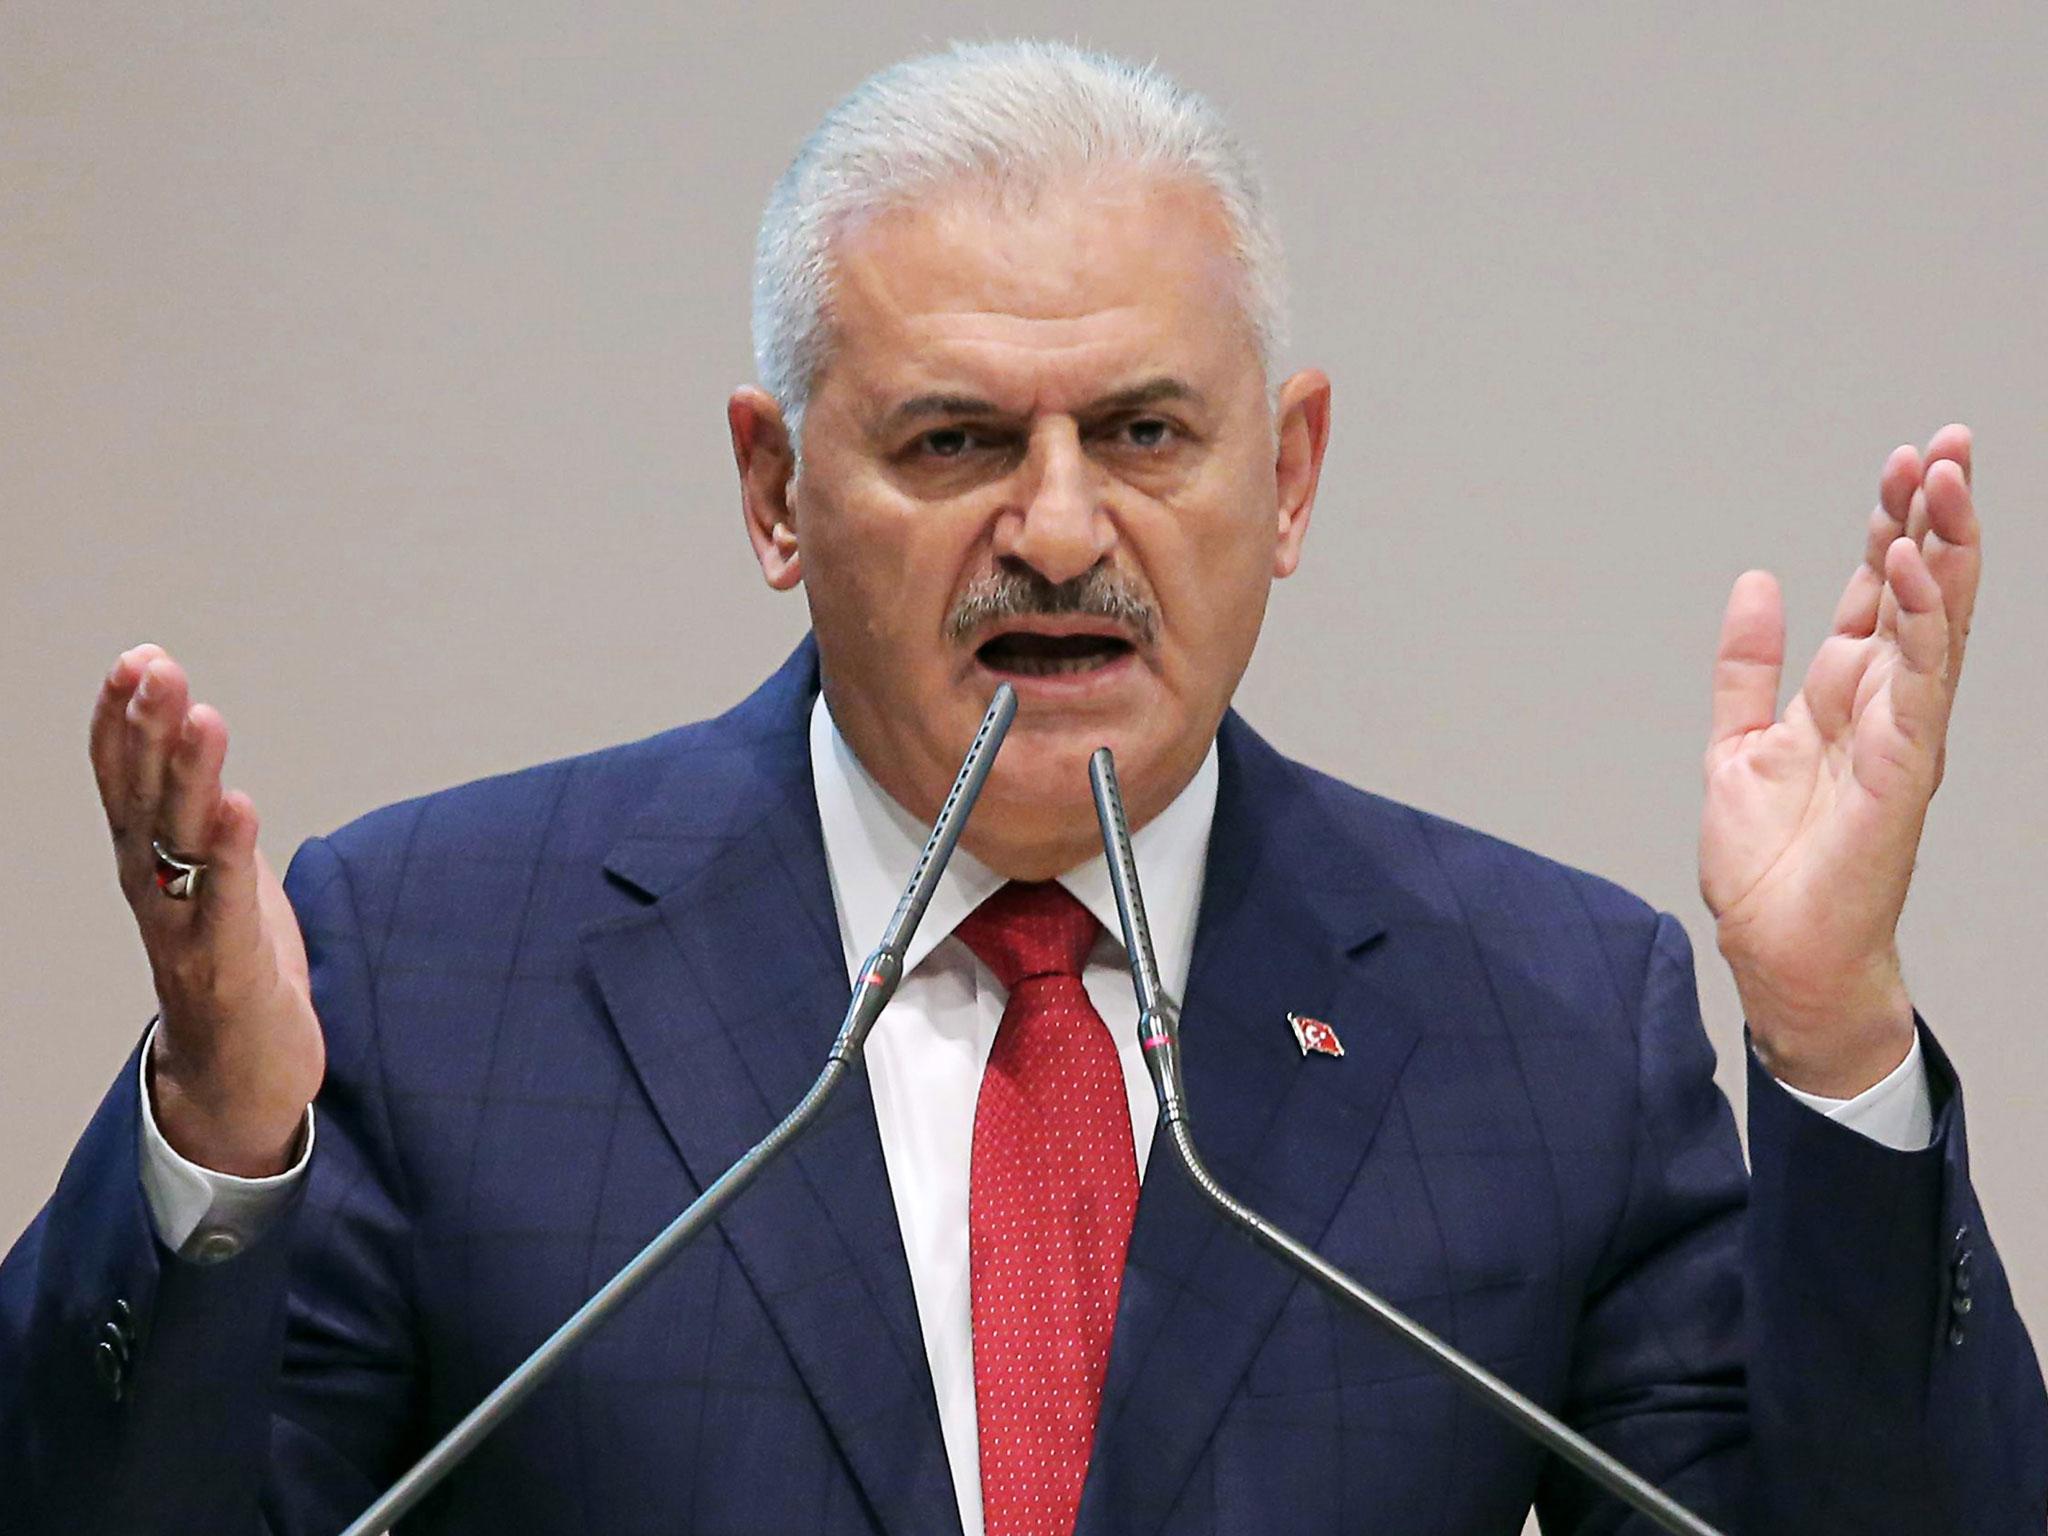 The order from Turkish Prime Minister Binali Yildirim said annual leave had been suspended until further notice